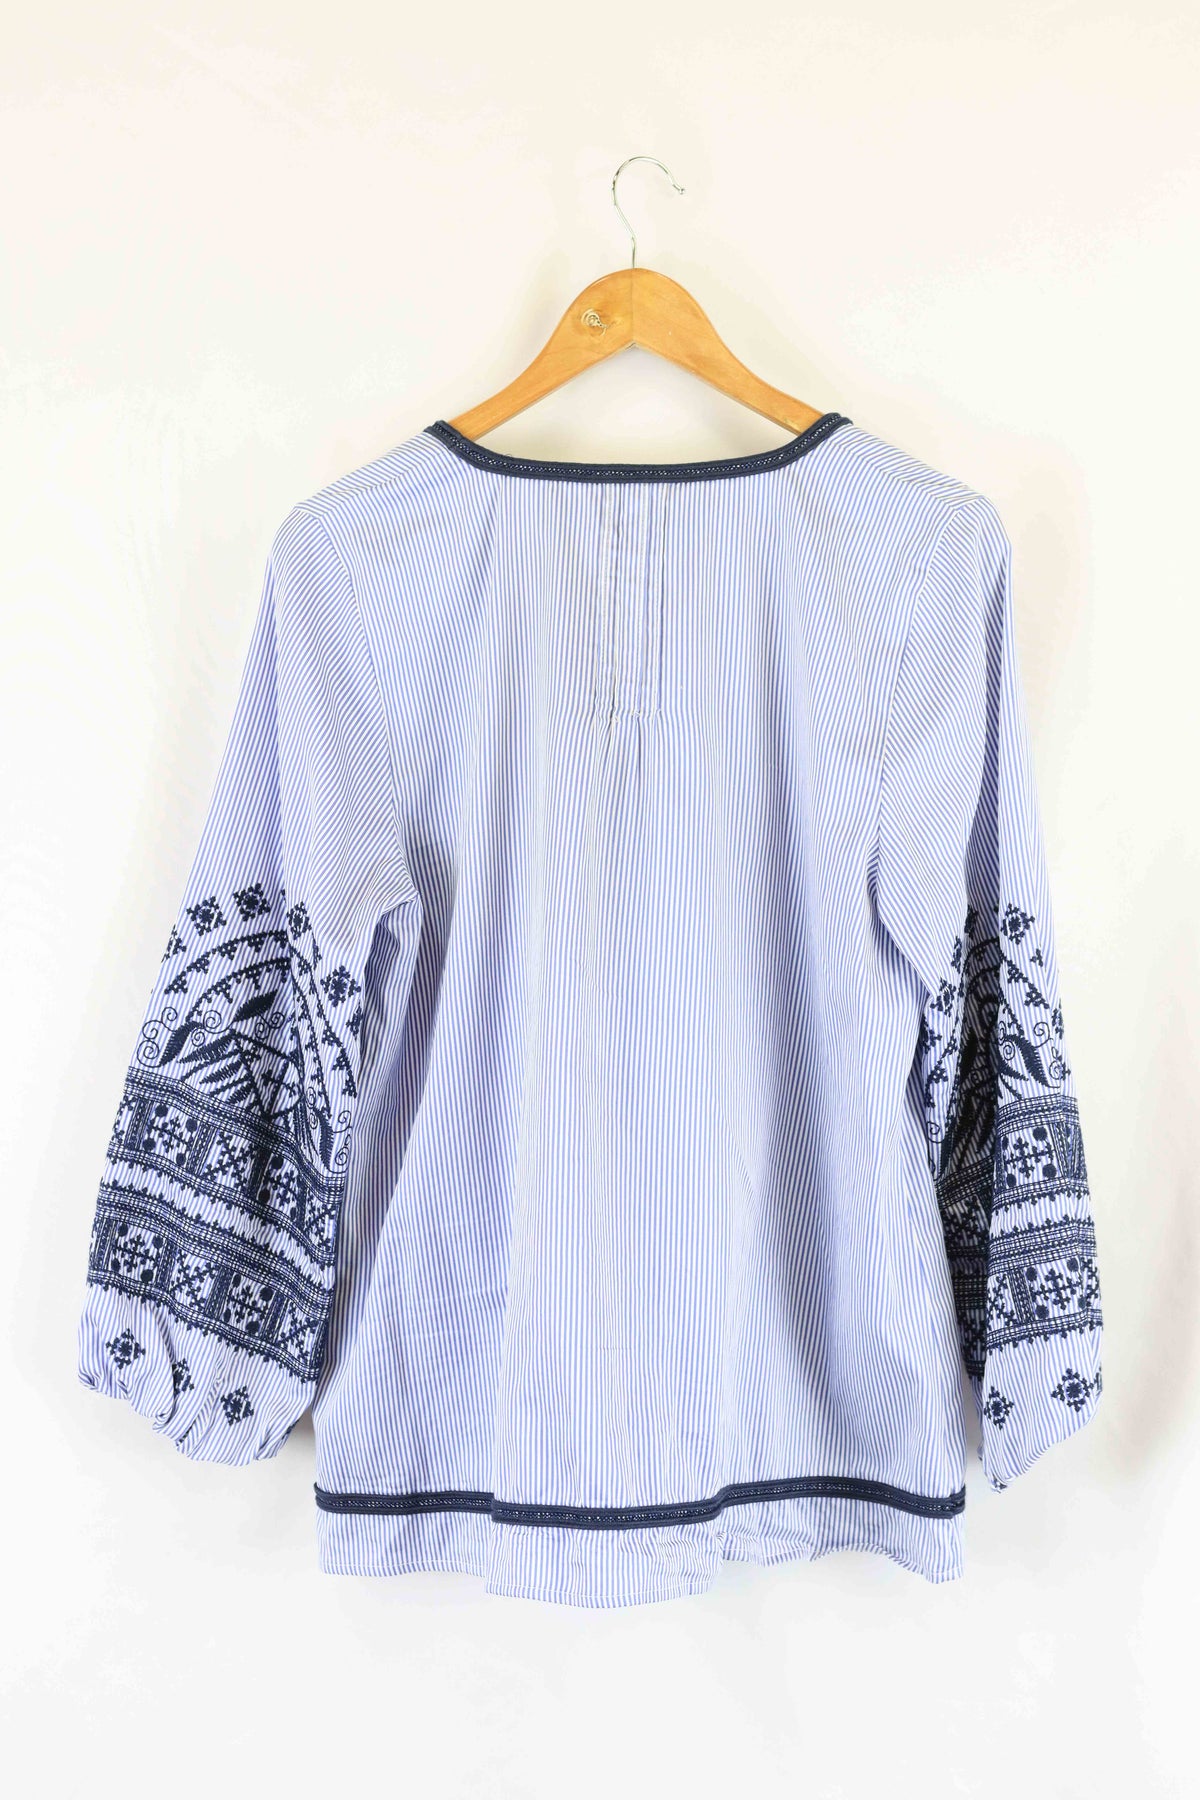 Sussan Blue Stripe Long Sleeve with Embroidery on Sleeves 12